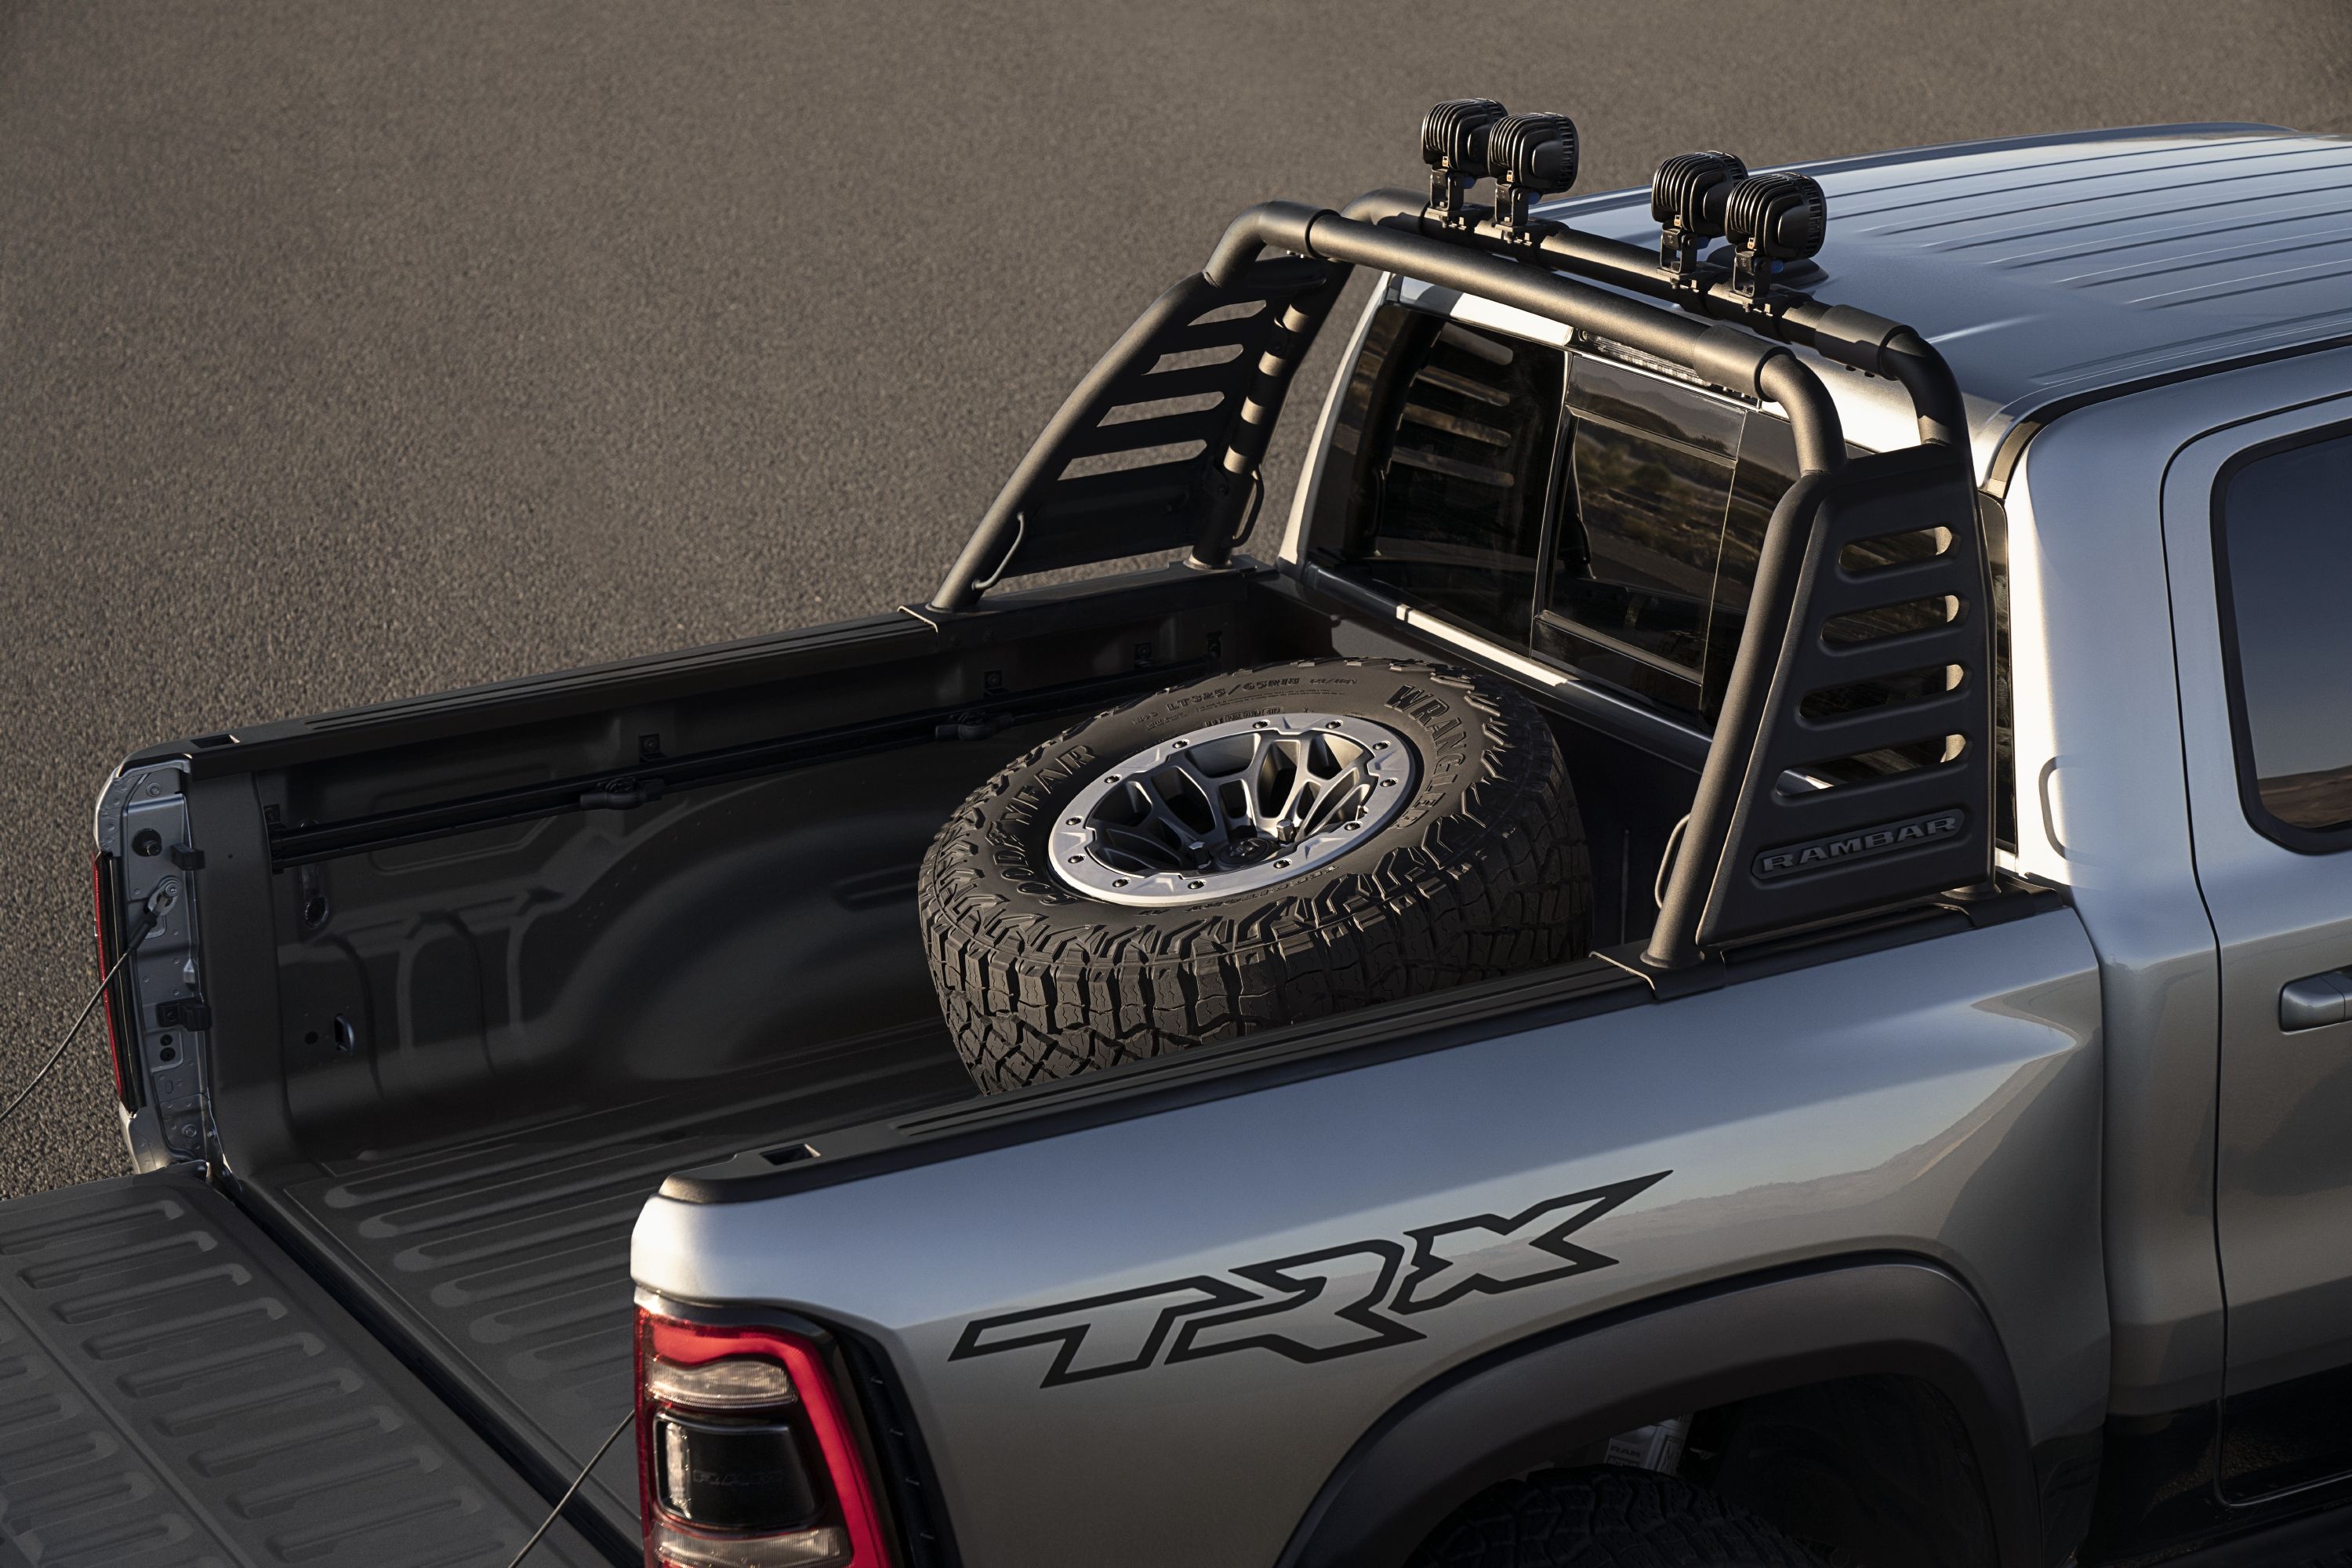 2021 Ram 1500 TRX Gets Even More Capable with Mopar Accessories